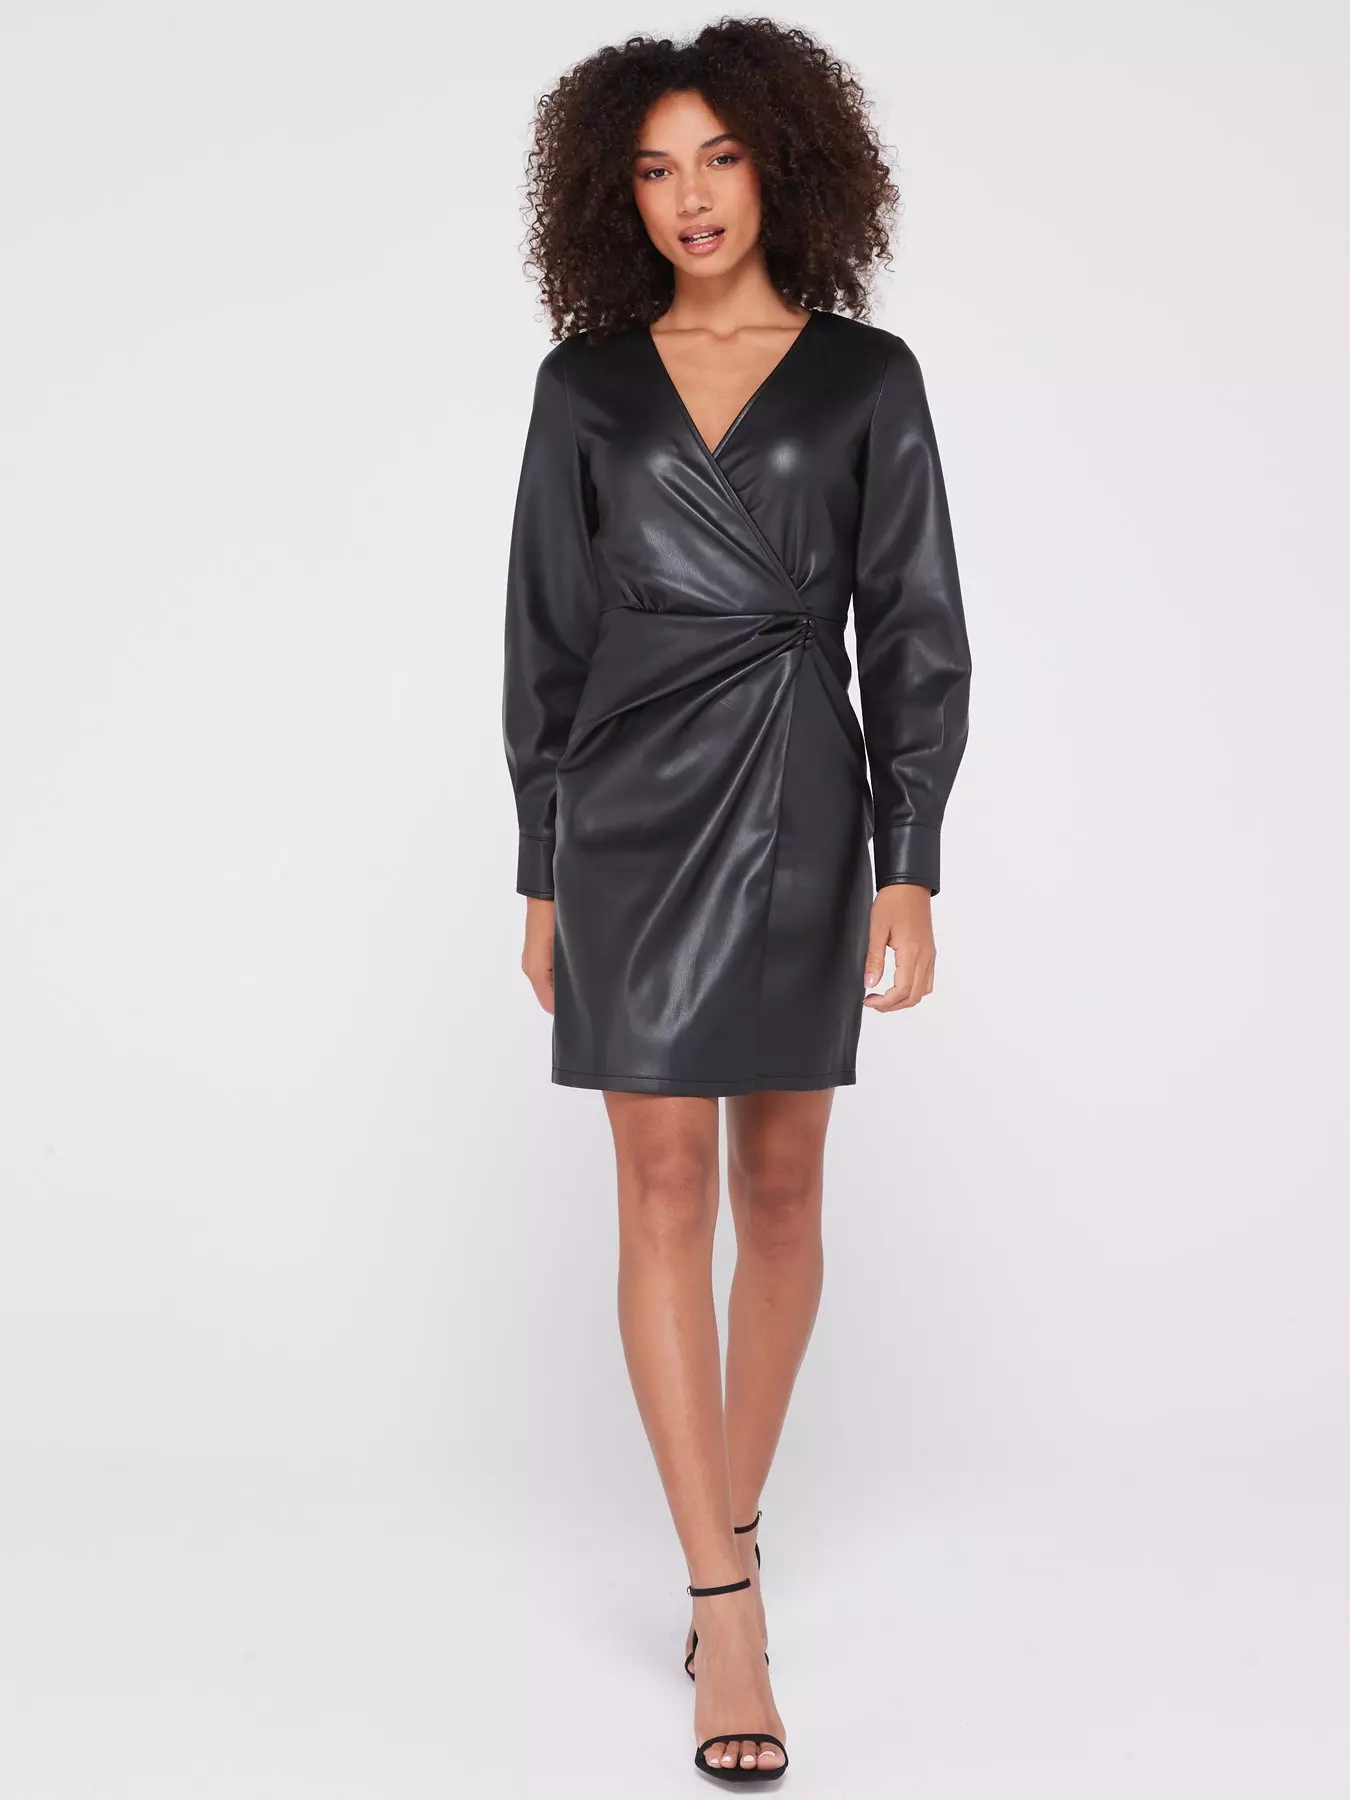 LS 100 Percent You Plus Size Ruched Faux-Leather Dress